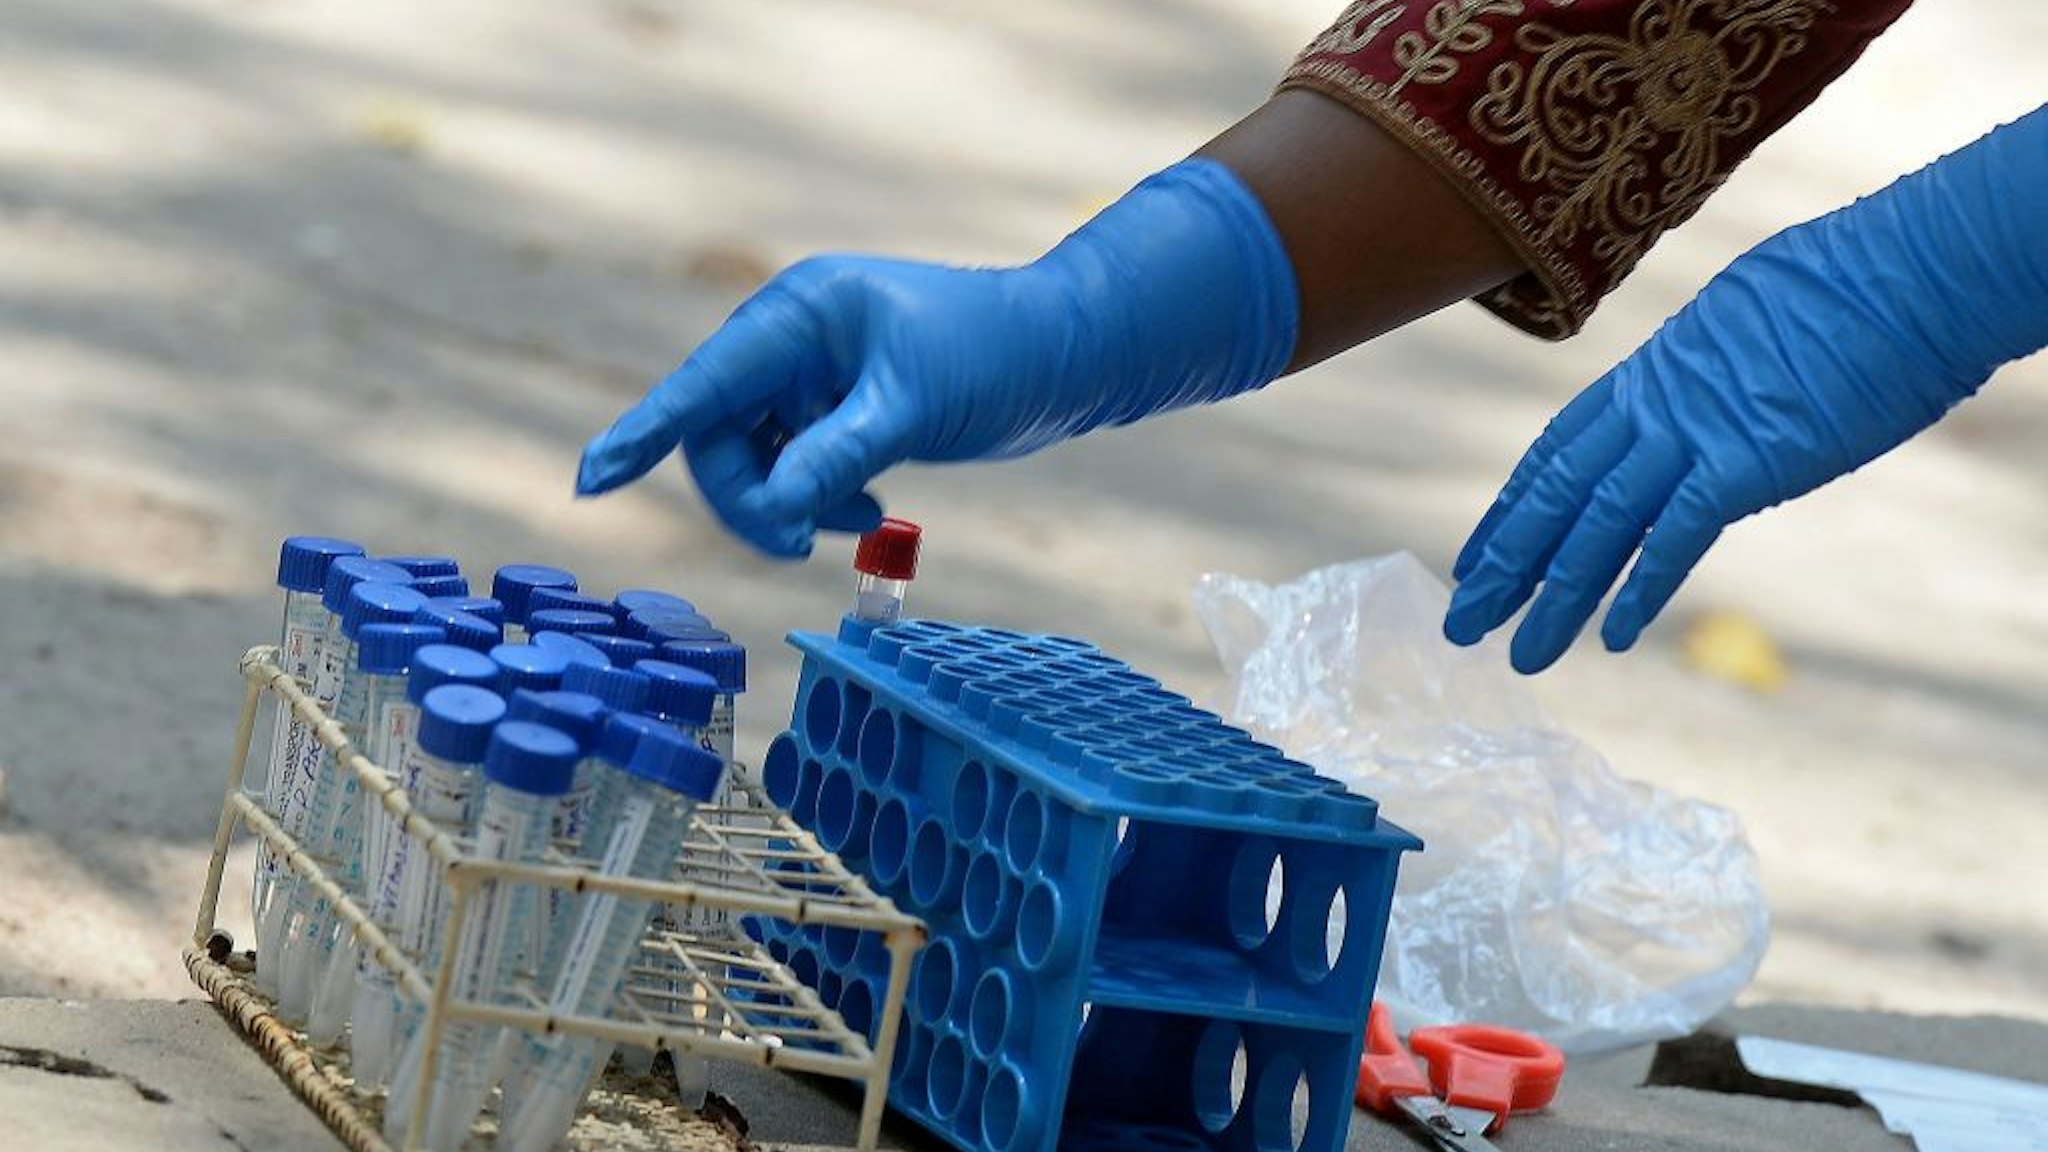 A medical worker arranges swab samples from the Reverse Transcription Polymerase Chain Reaction (RT-PCR) tests conducted for the Covid-19 coronavirus screening at a testing centre in Hyderabad on April 29, 2021. (Photo by NOAH SEELAM / AFP) (Photo by NOAH SEELAM/AFP via Getty Images)